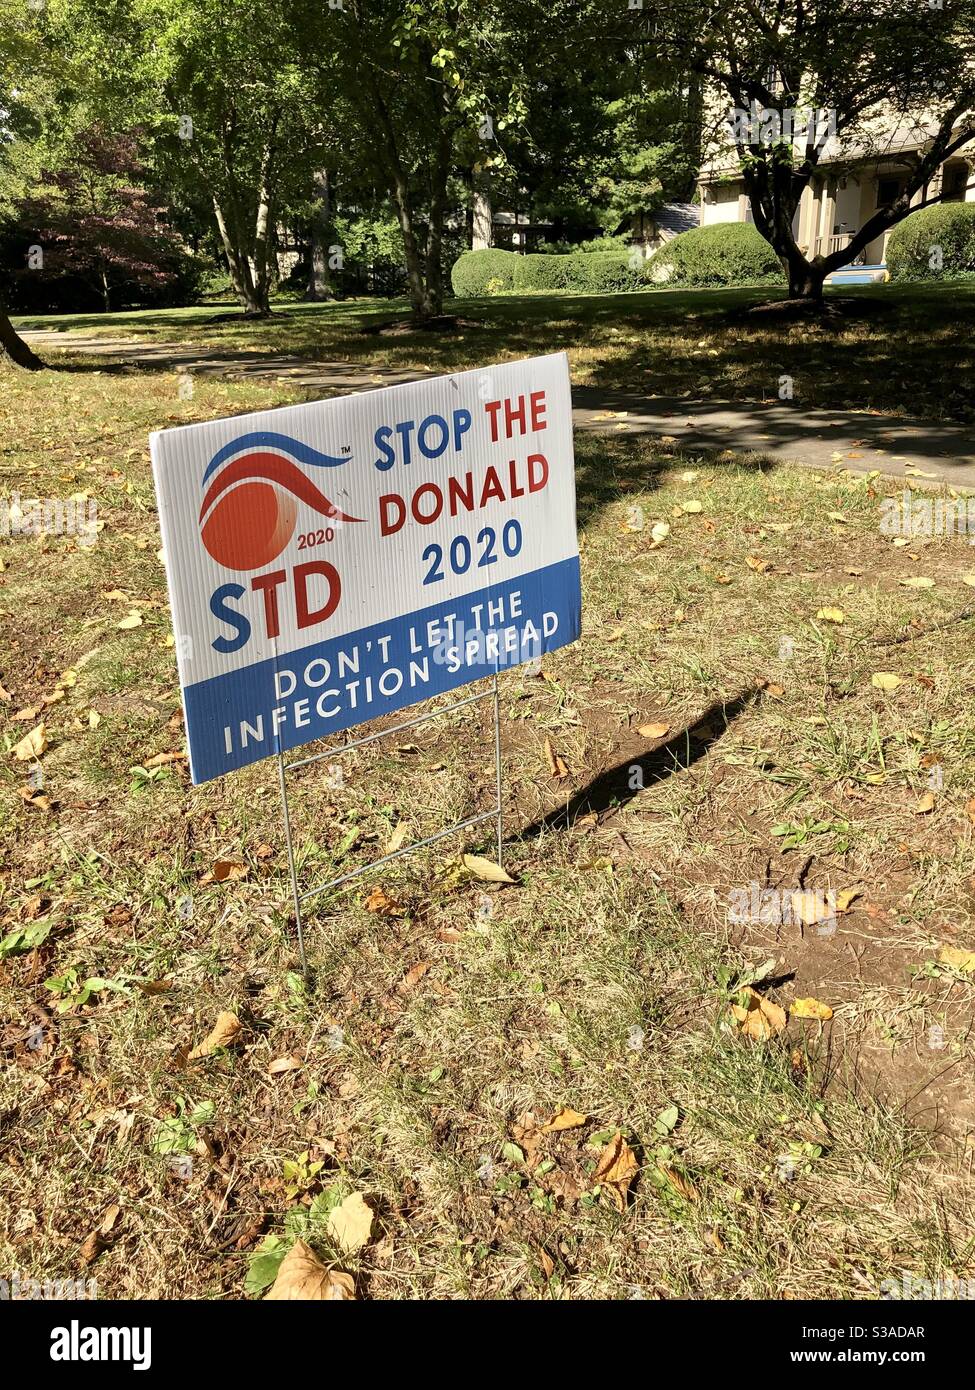 PRINCETON, NJ -View of an anti-Trump political lawn sign saying STD Stop the Donald during the 2020 US presidential campaign in a front yard in New Jersey. Stock Photo